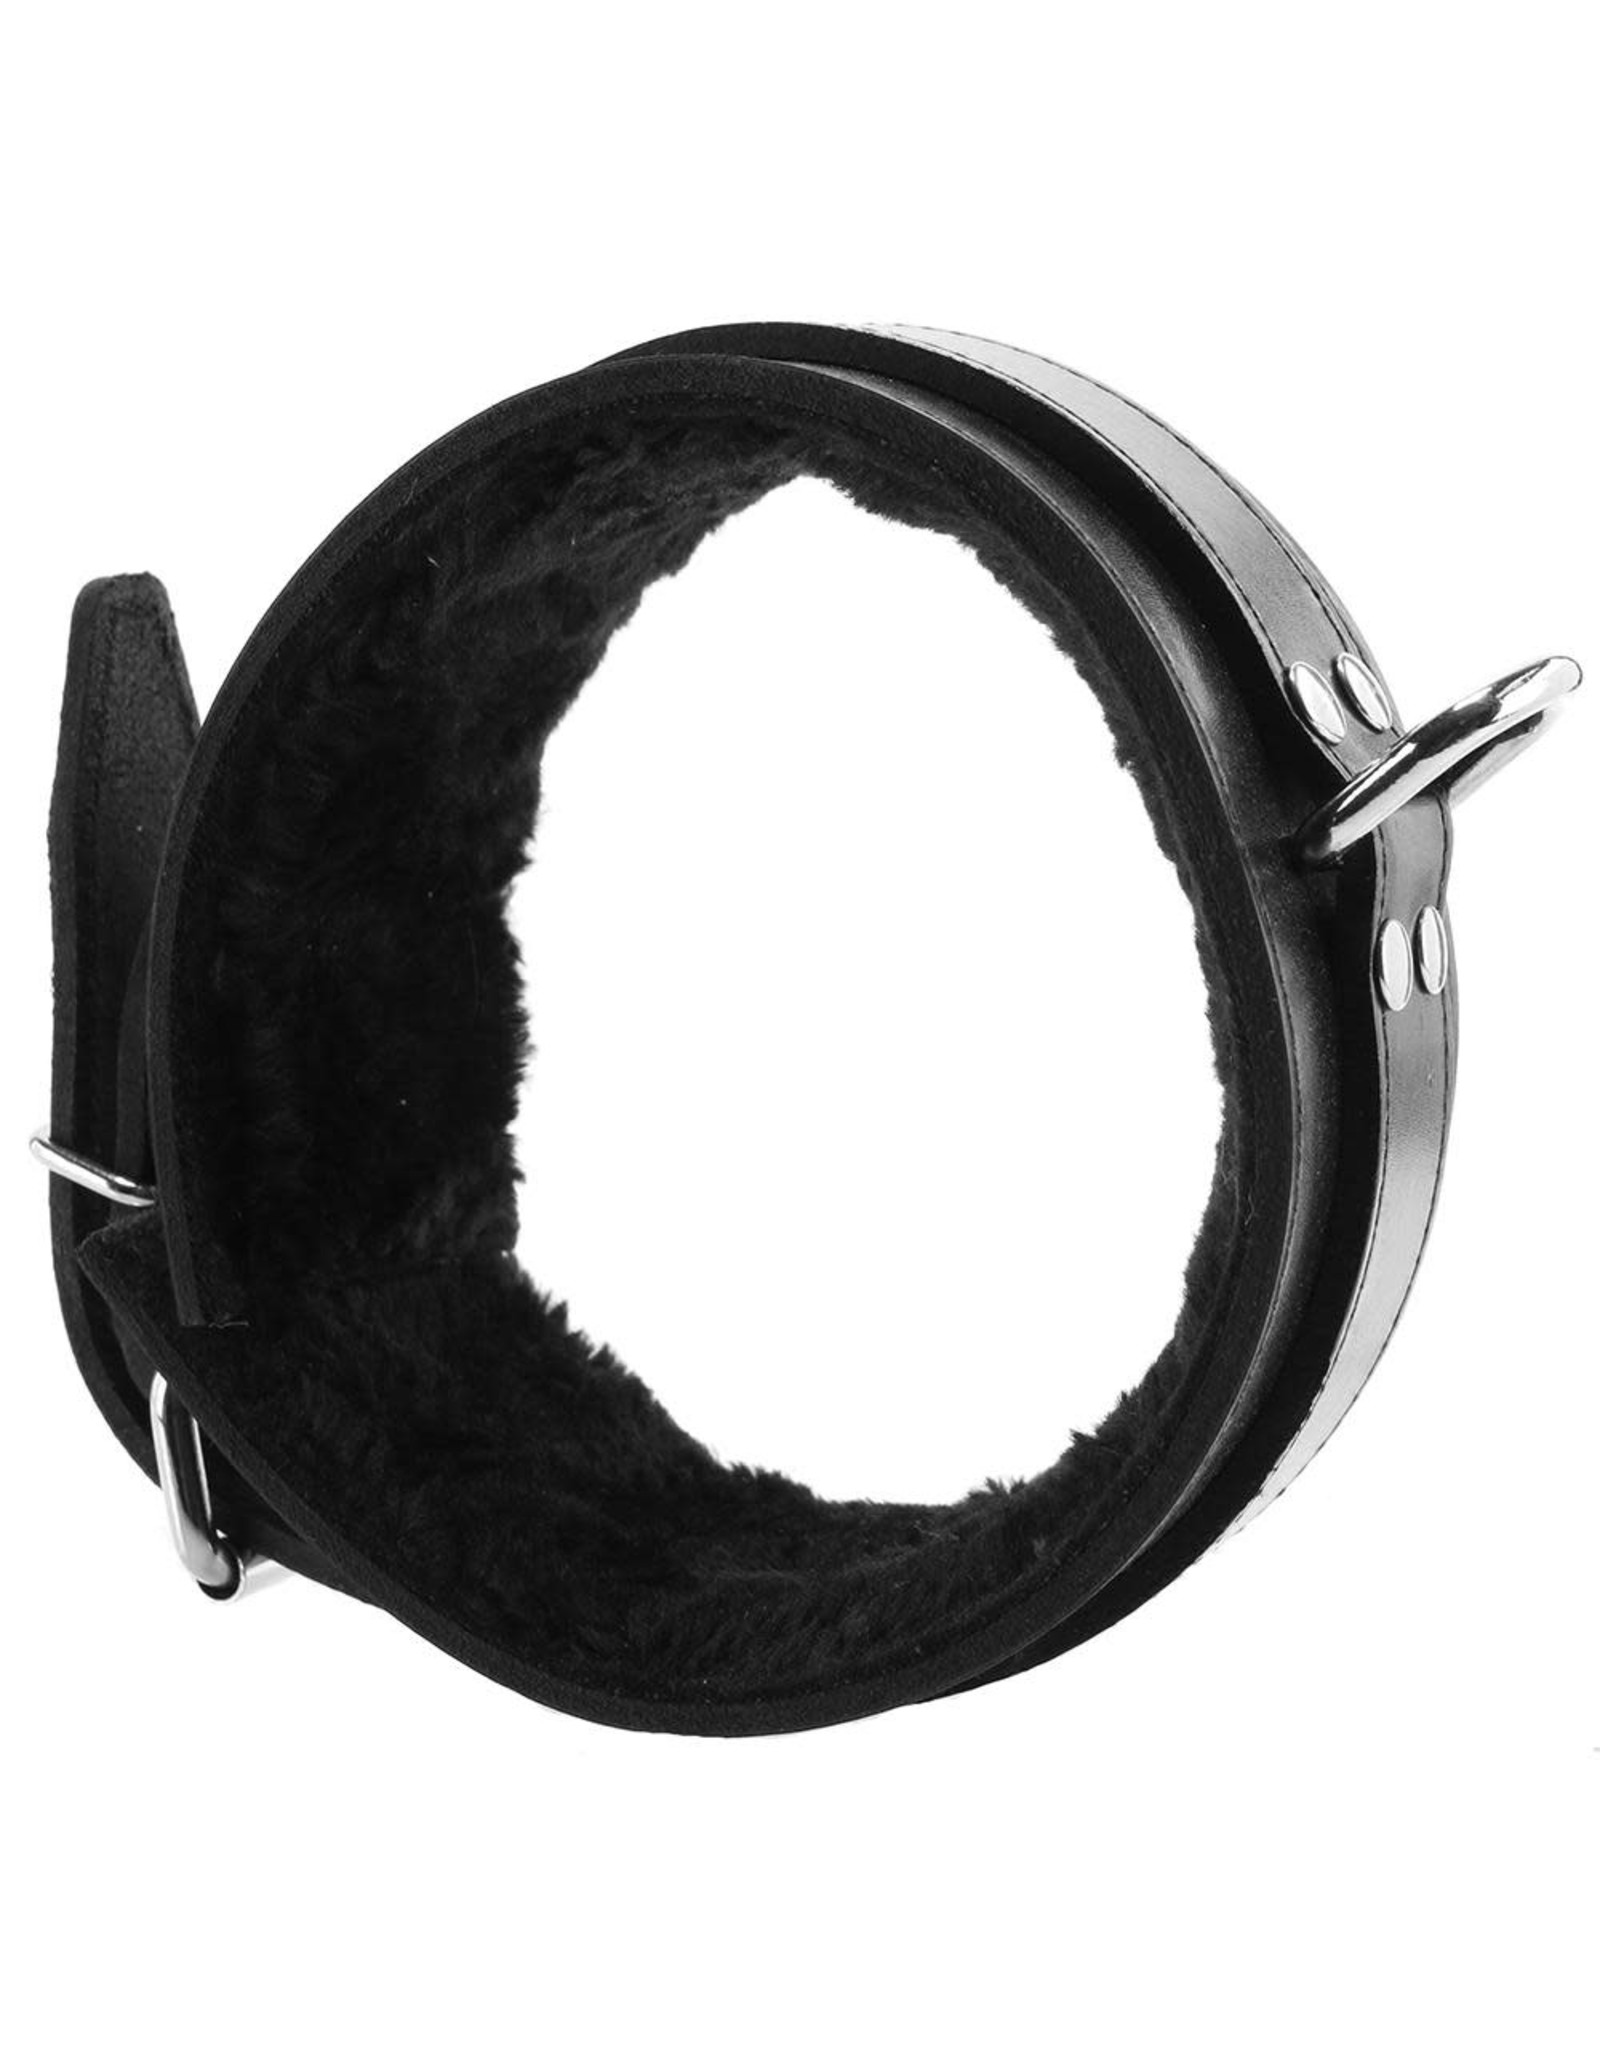 Rouge - Fur Lined Leather Collar - Black